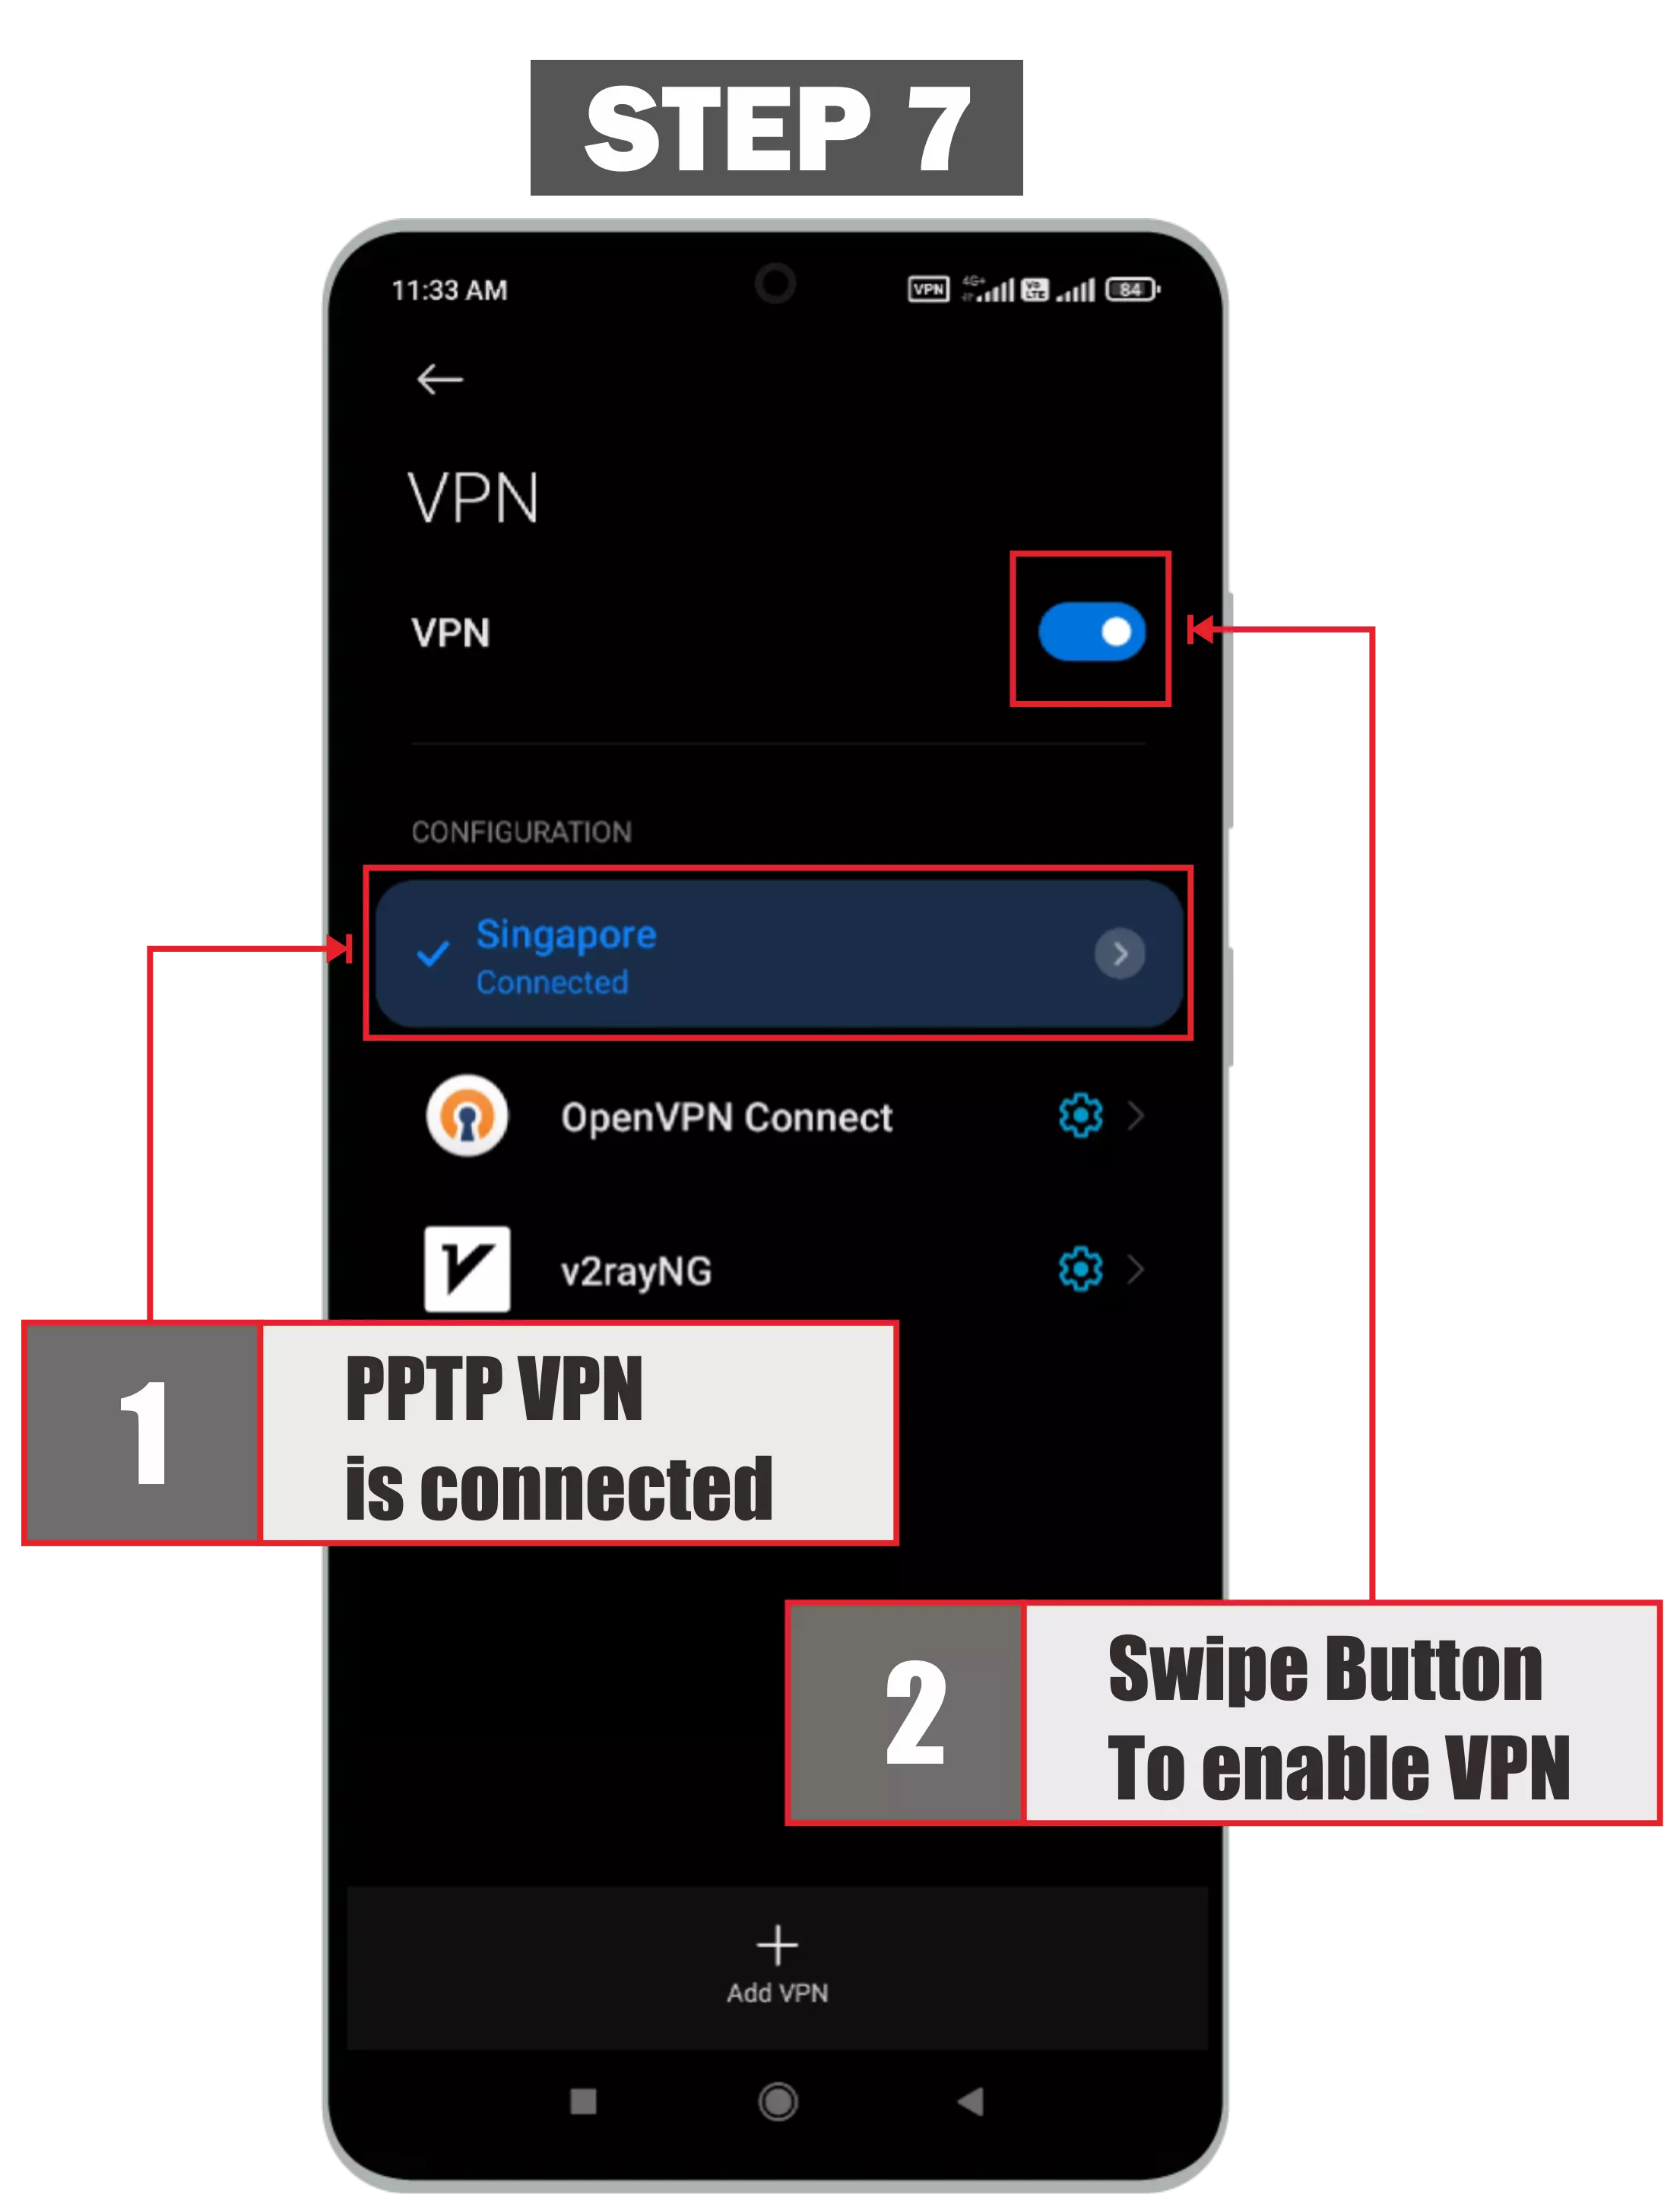 The seventh step is how to use pptp vpn on android